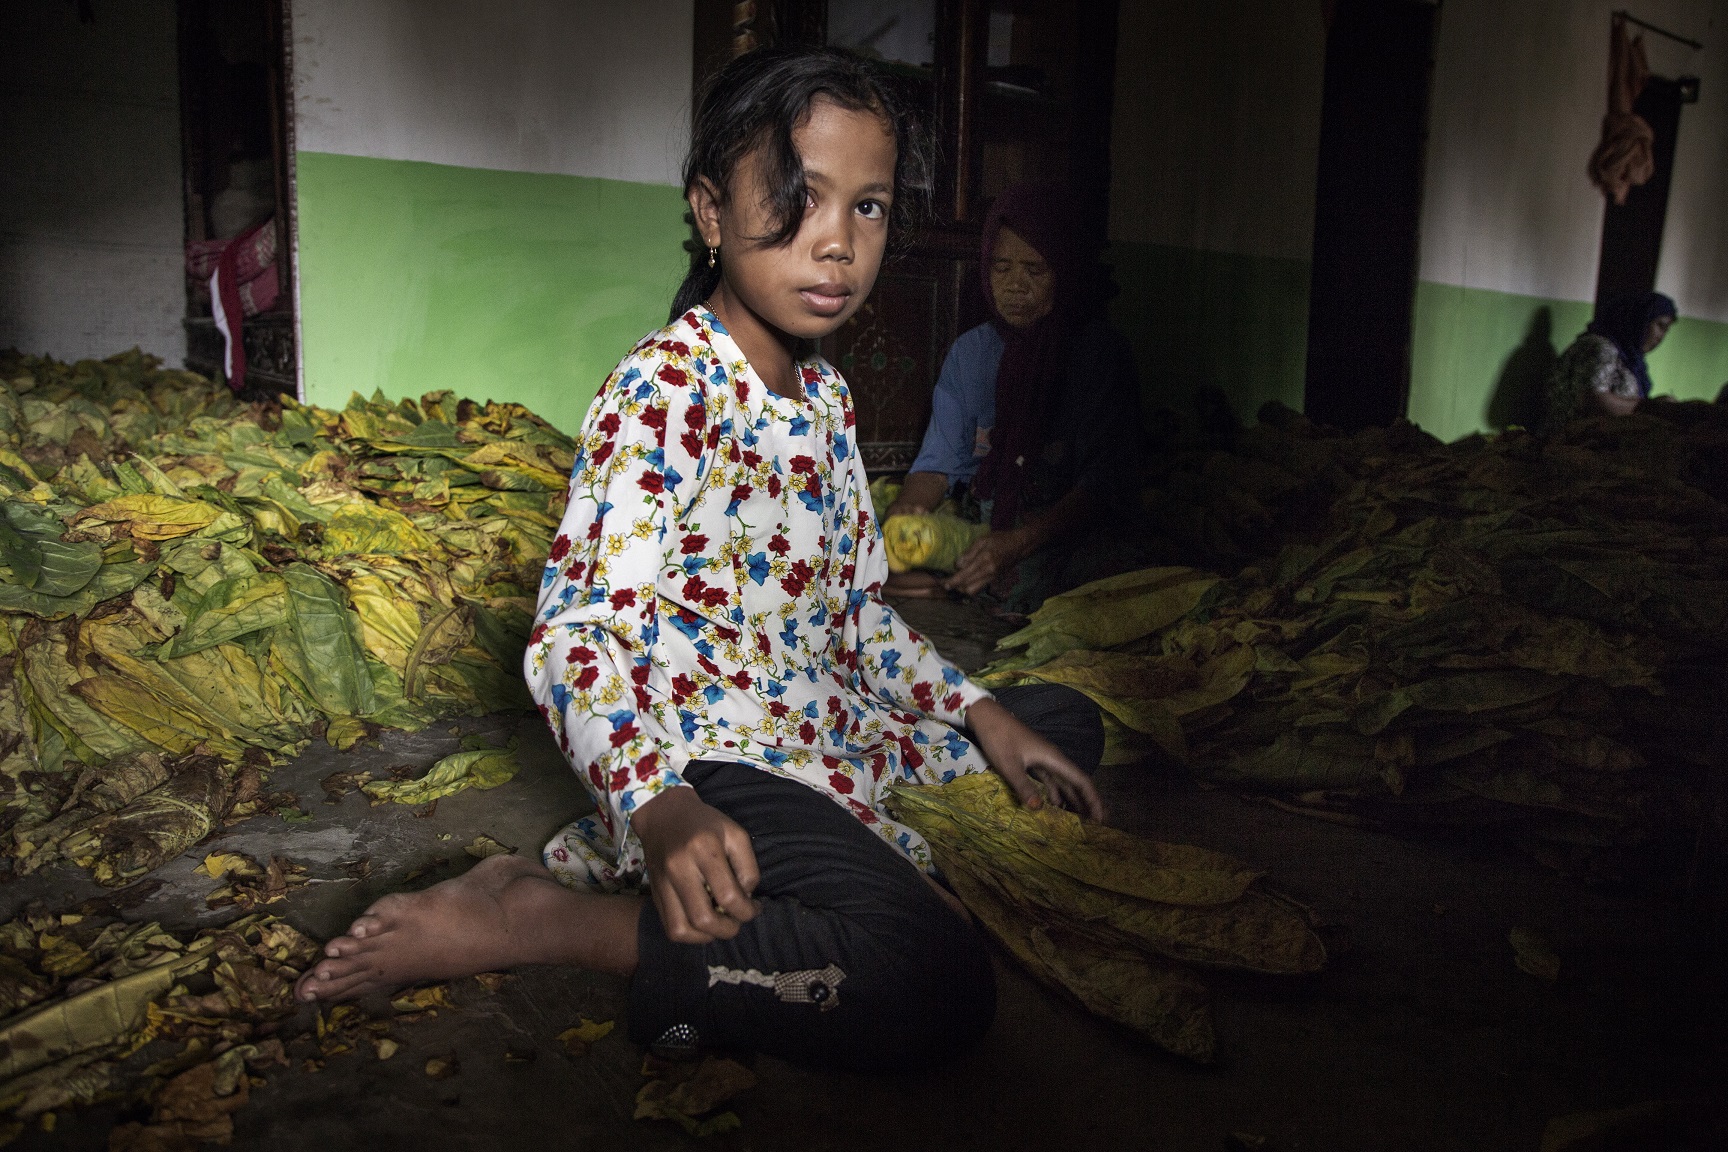 An 8-year-old girl sorts and bundles tobacco leaves by hand near Sampang, East Java. Photo: Human Rights Watch / Marcus Bleasdale